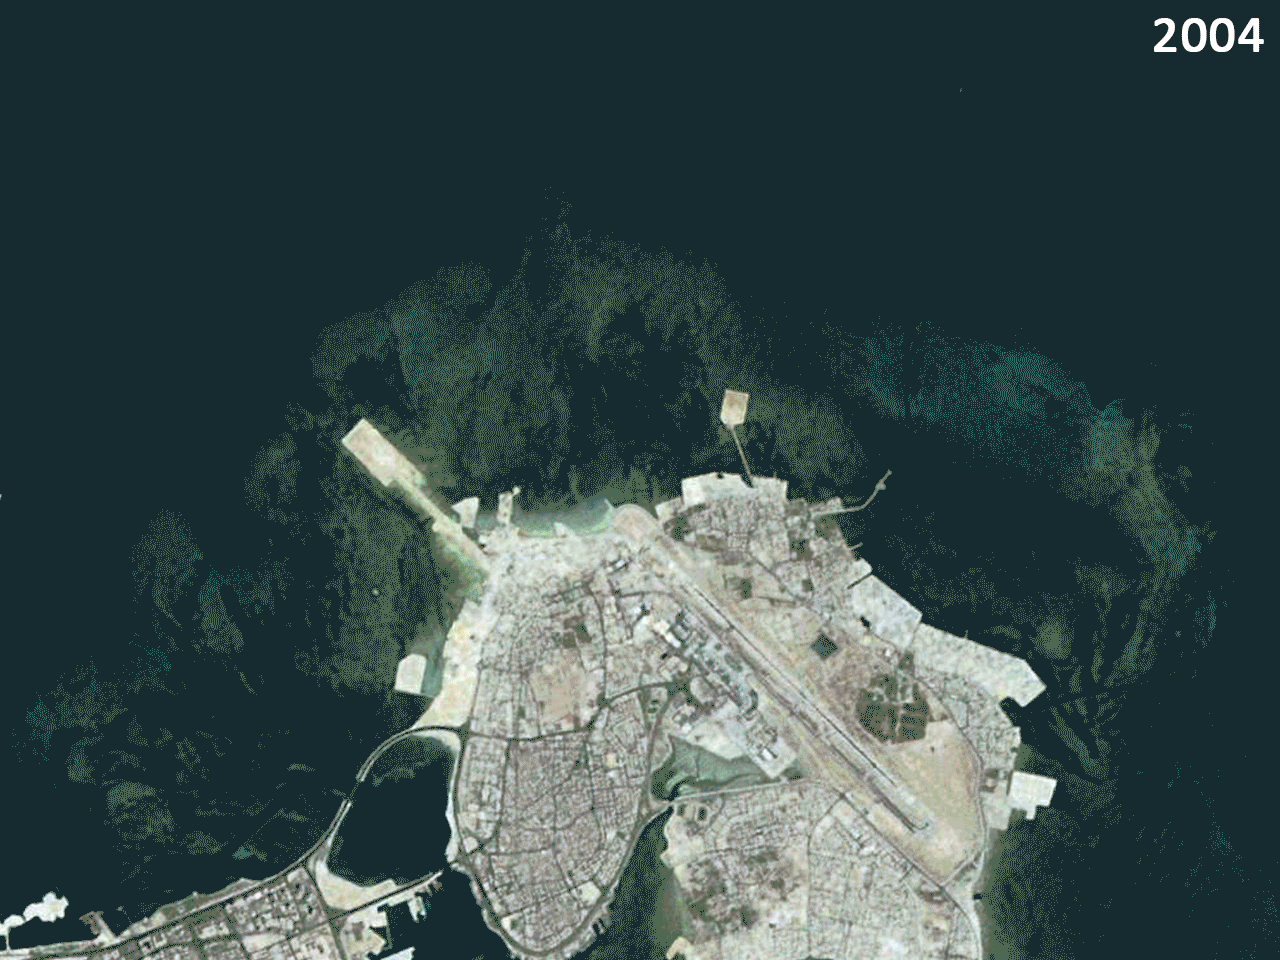 Land Reclaim and Terraforming in Bahrein. Images courtesy of Google Earth.